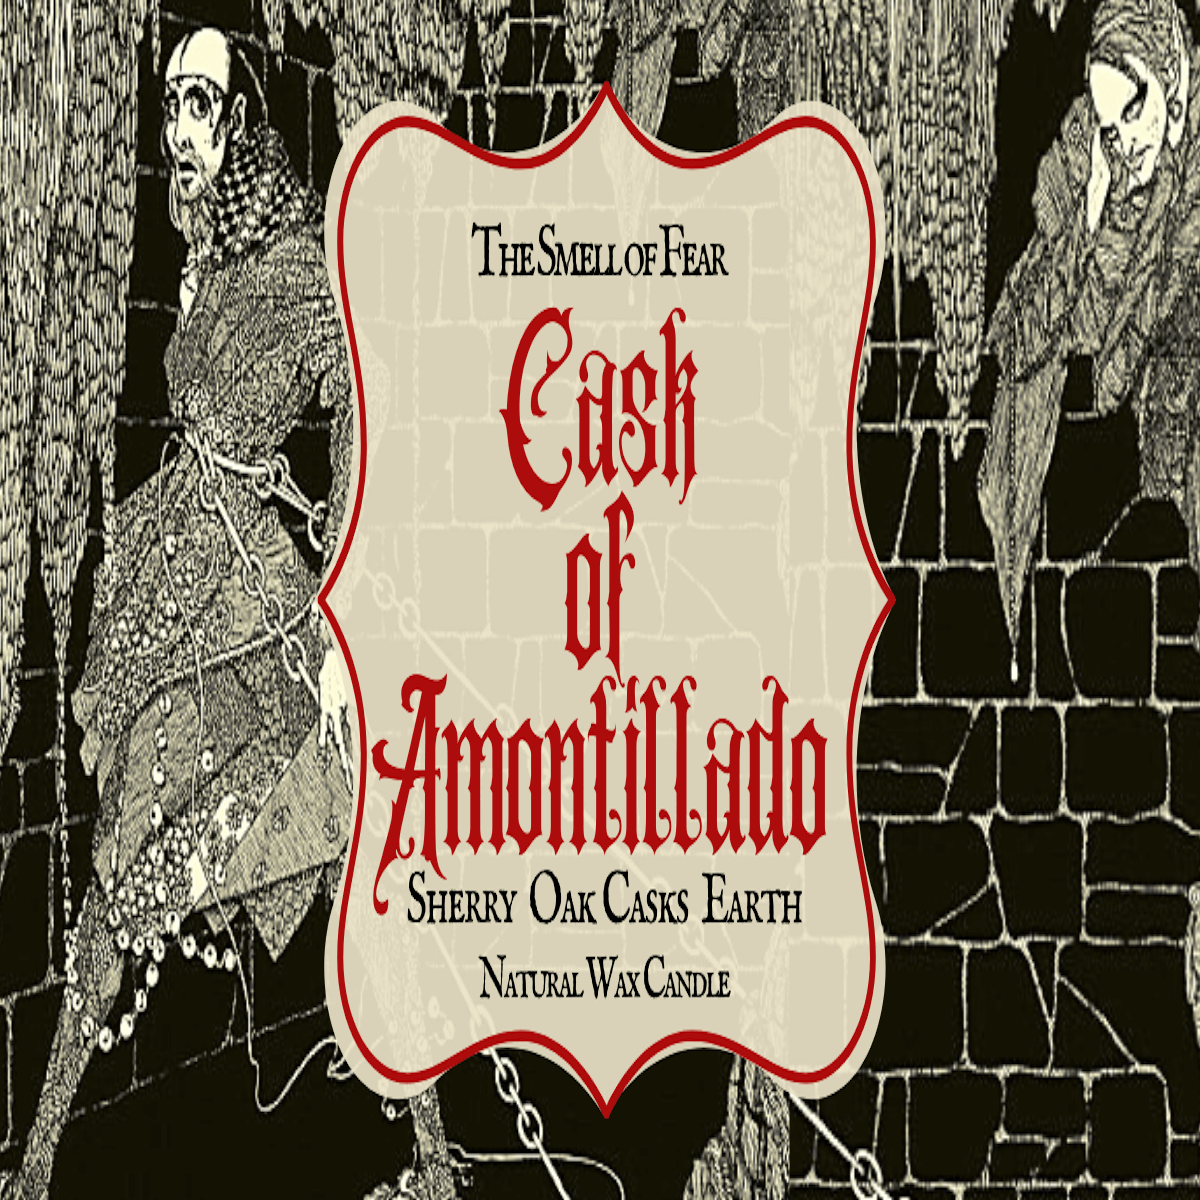 Cask of Amontillado Candle - The Smell of Fear 